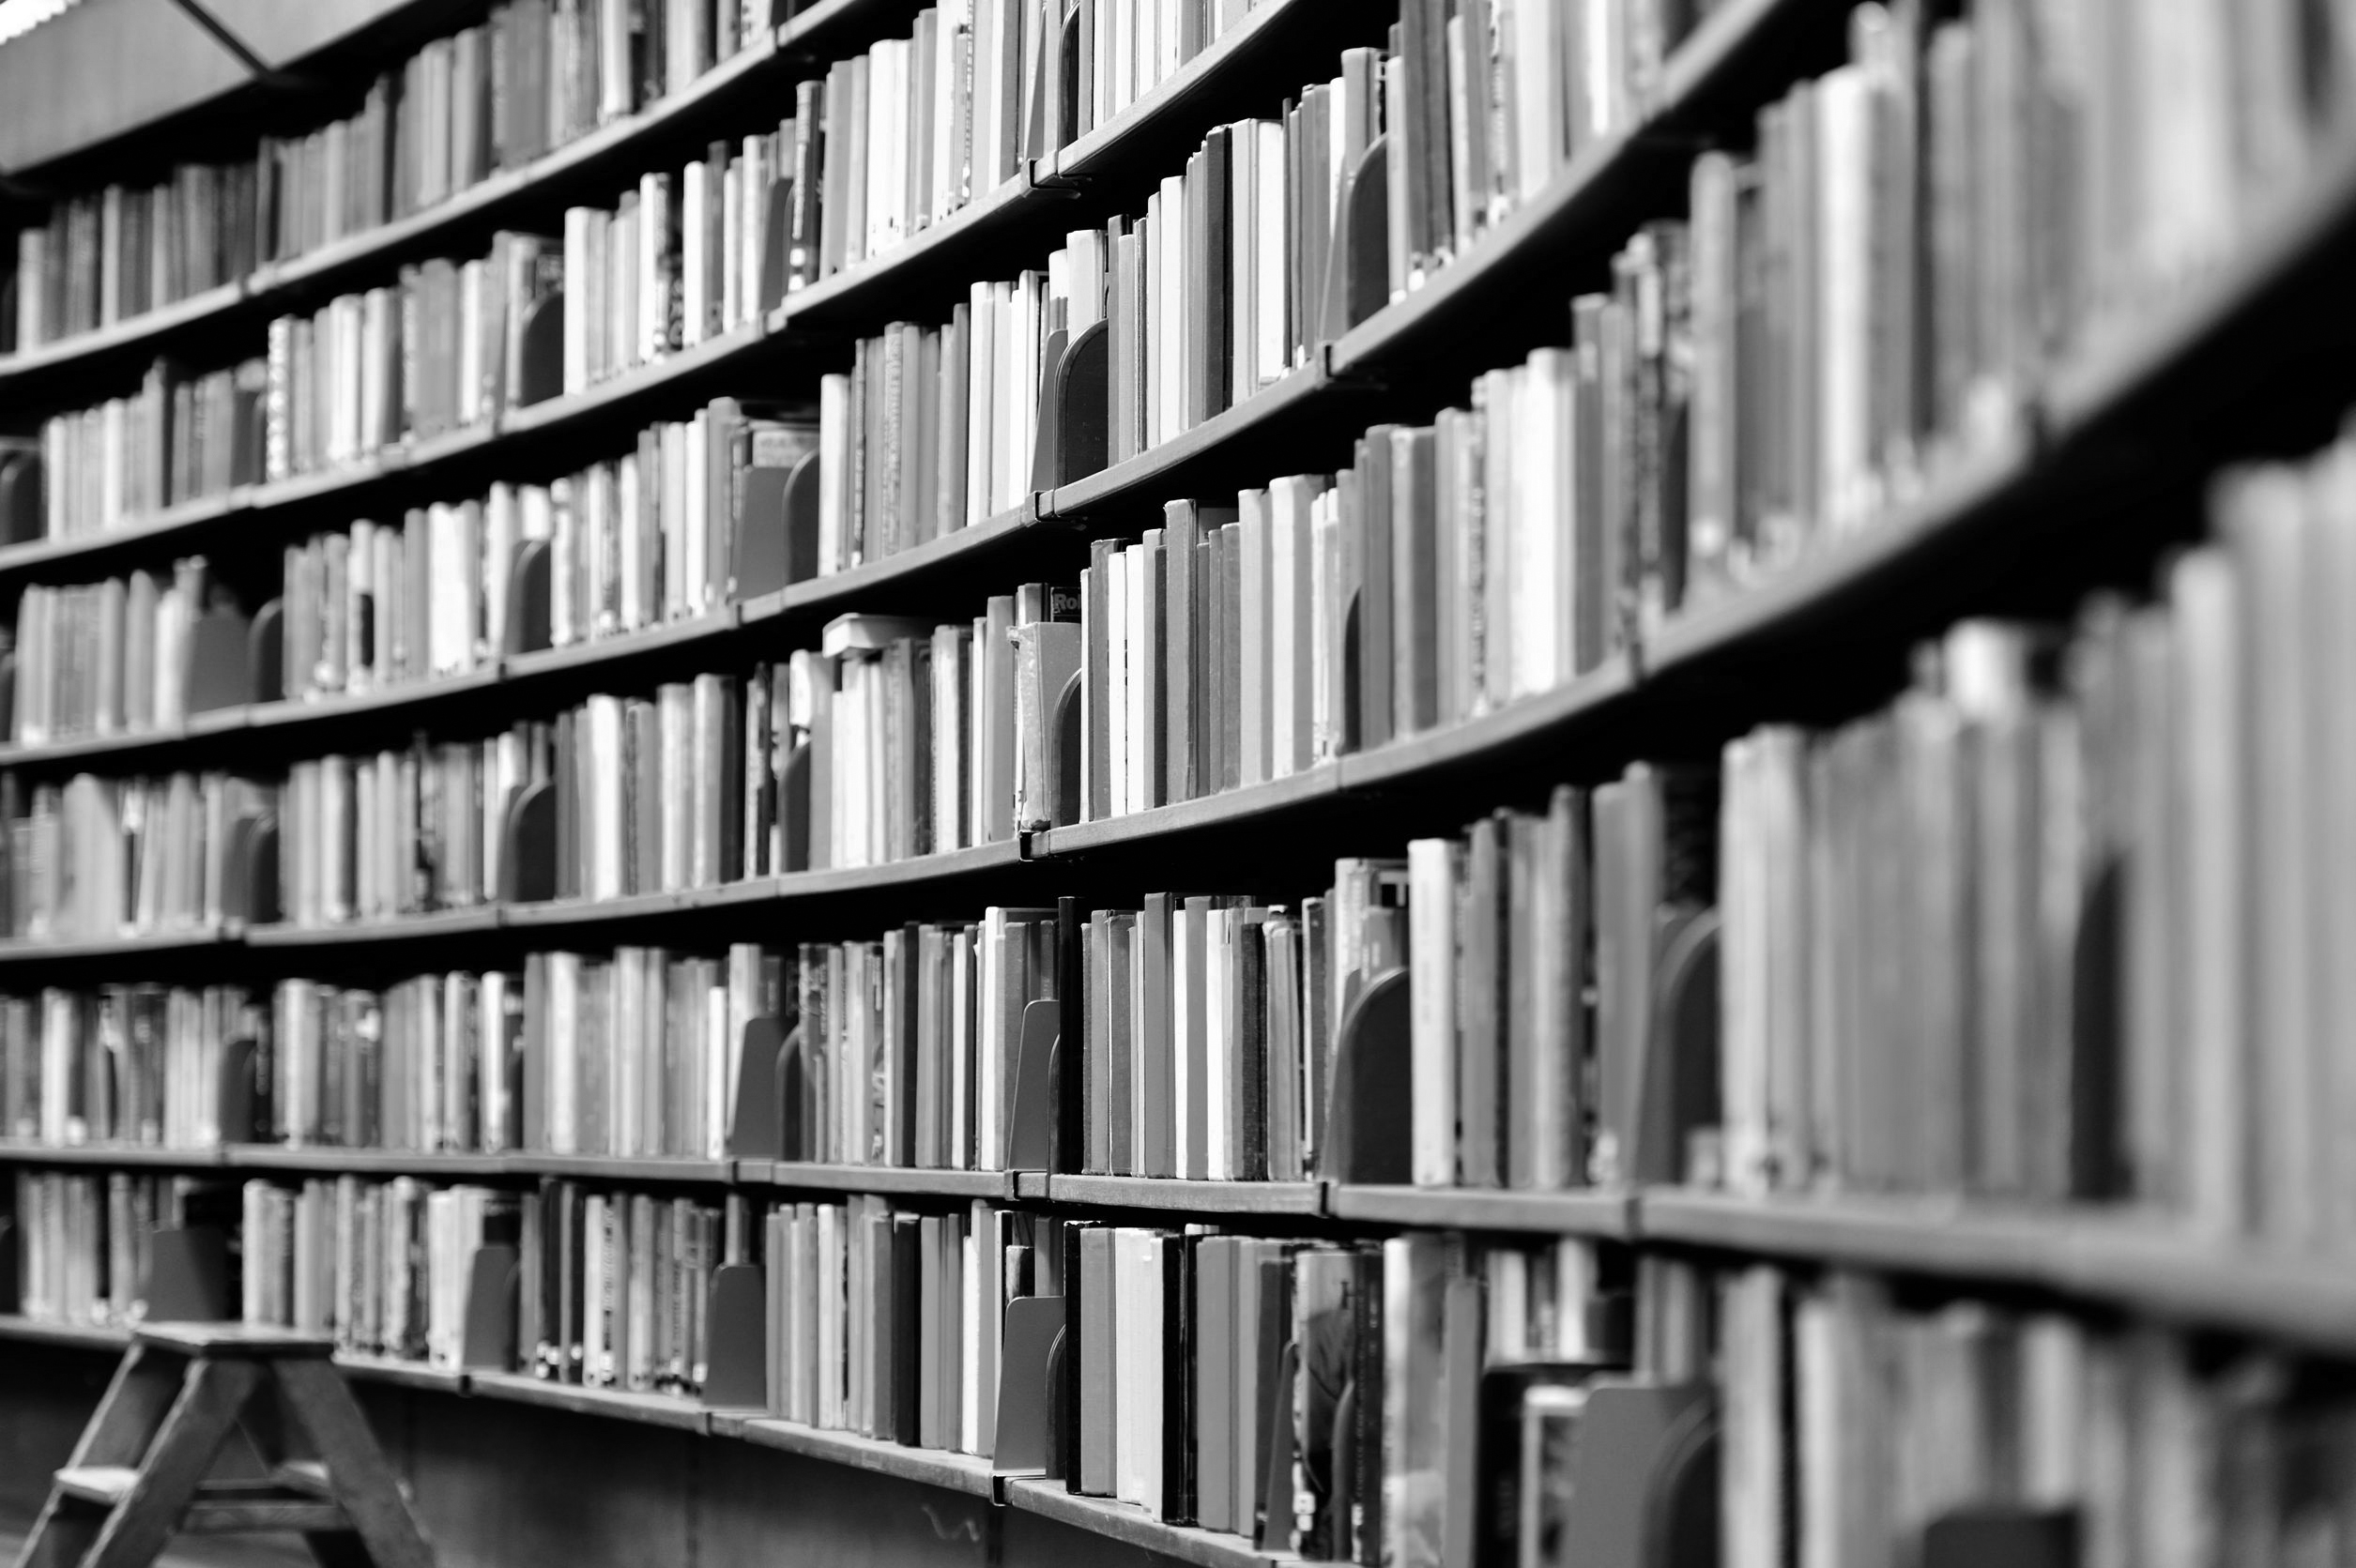 Black and white image of shelves of books.